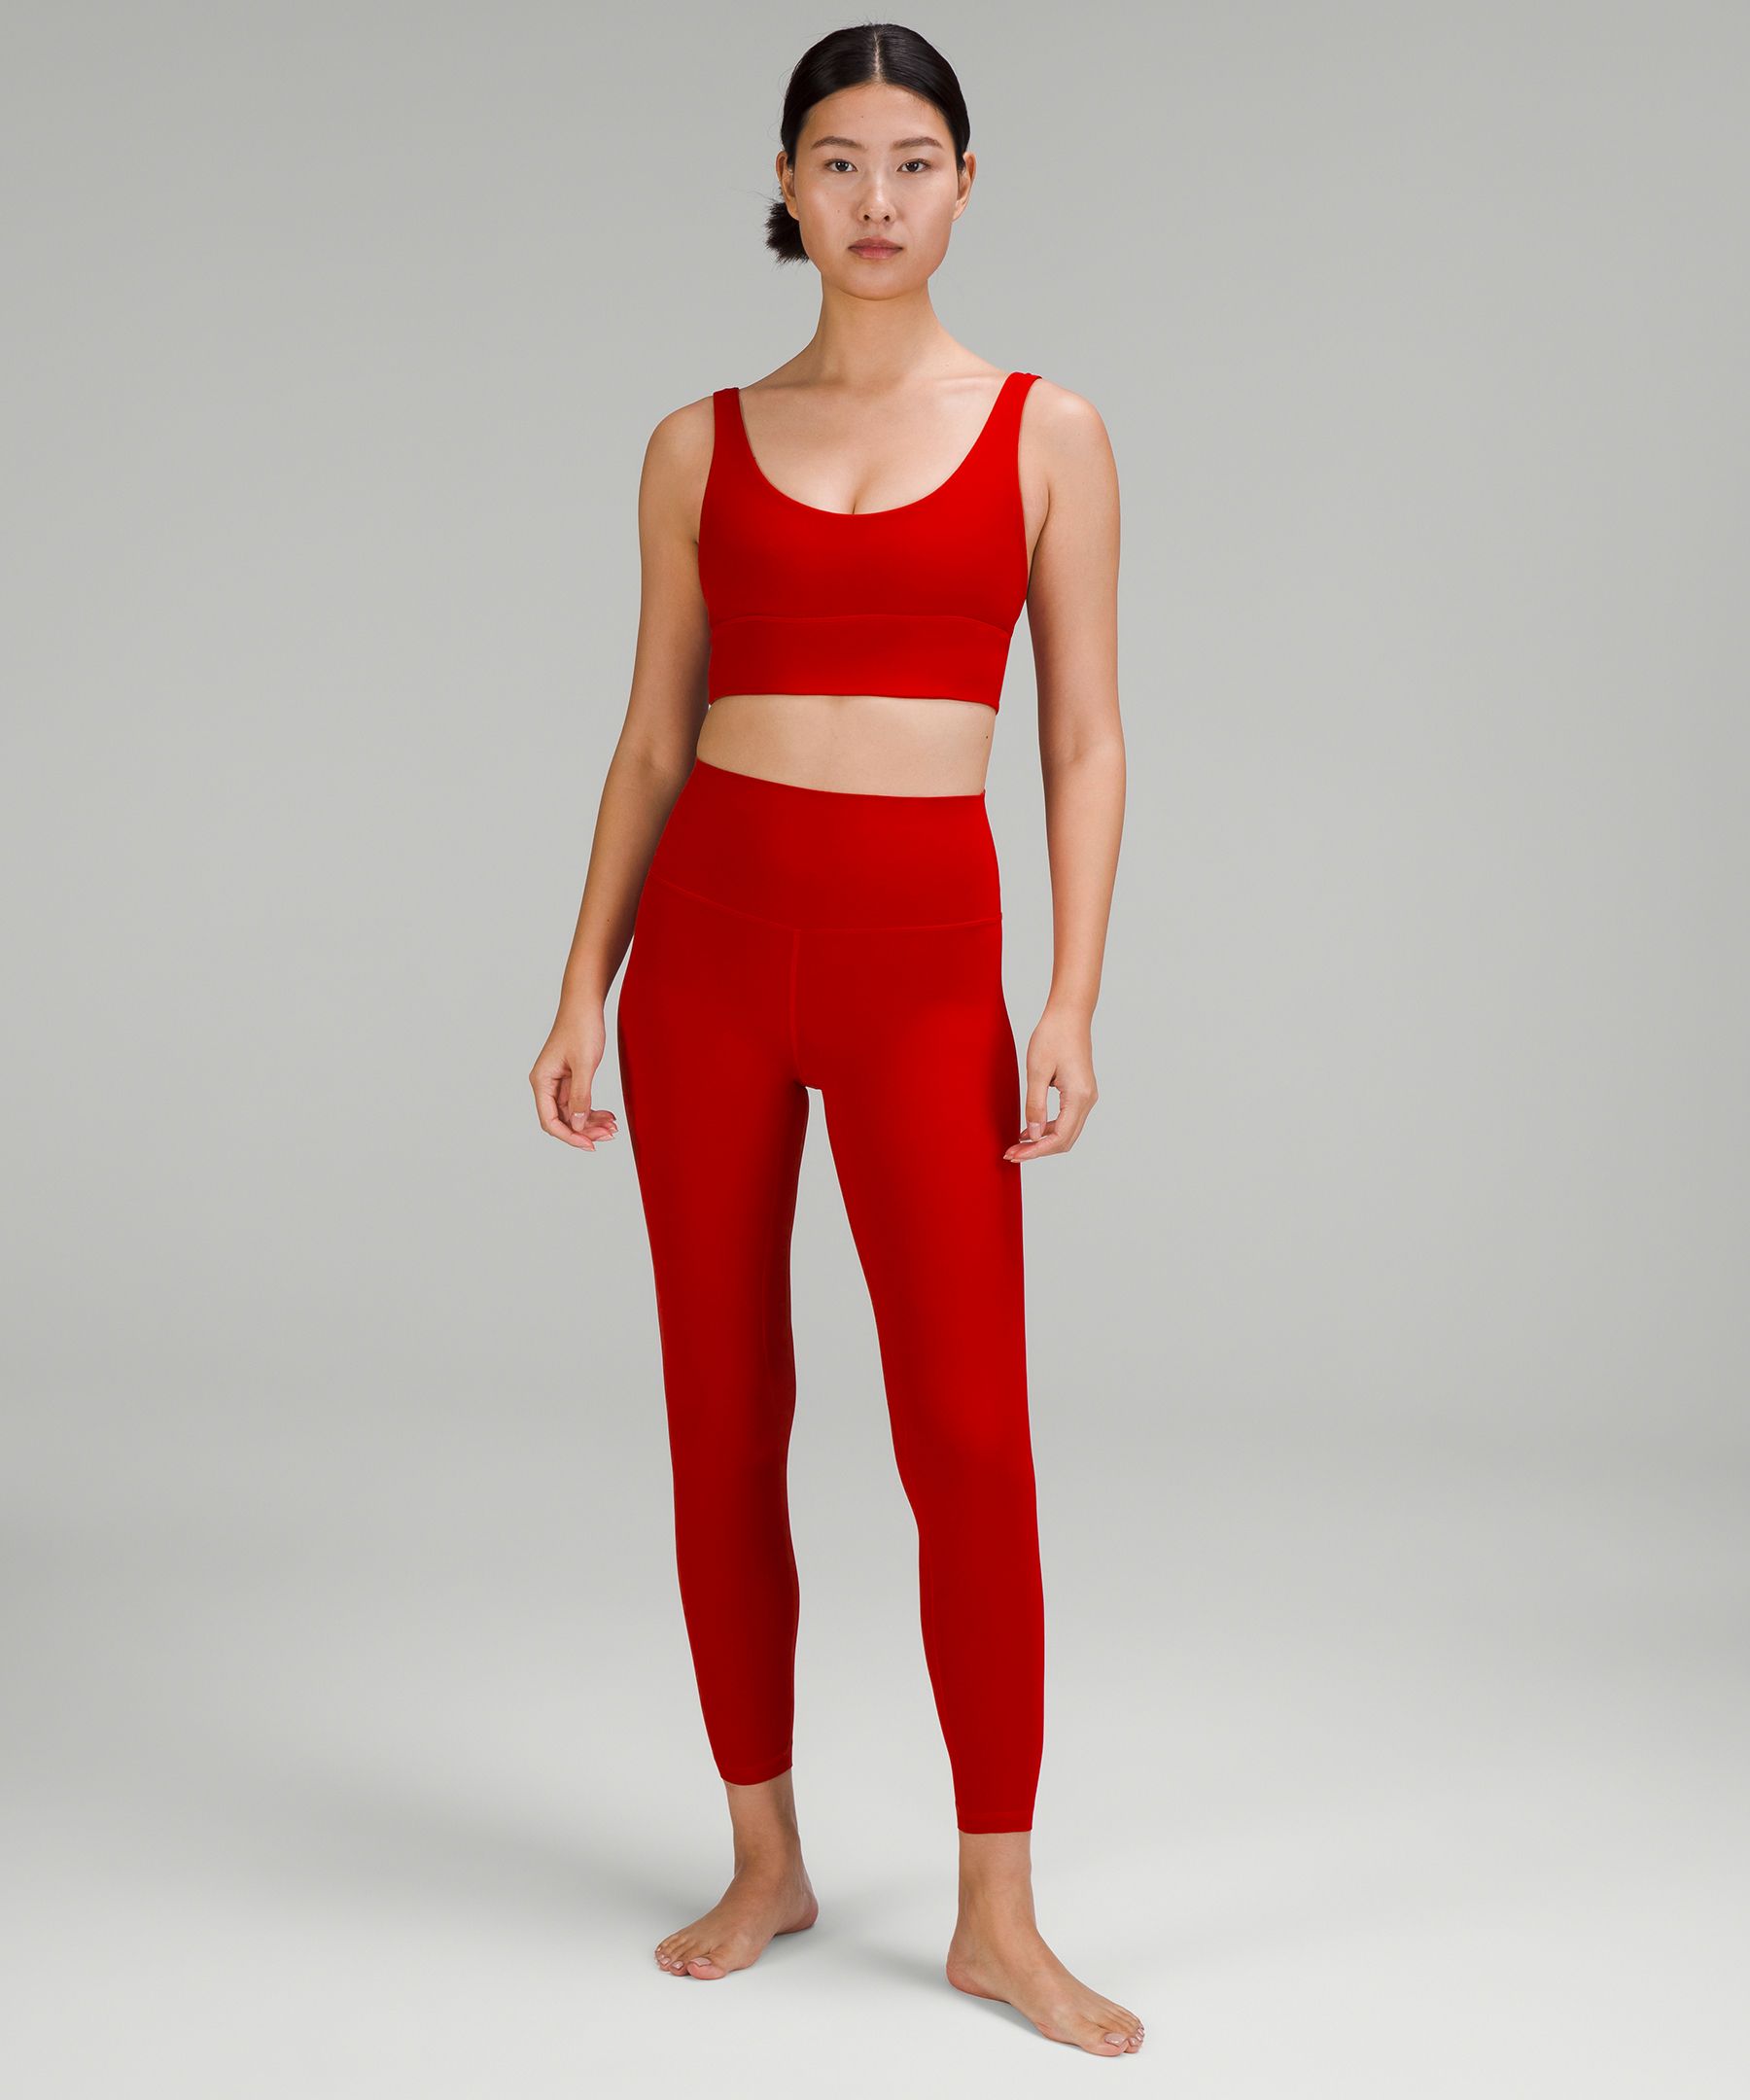 lululemon Align™ High-Rise Pant 24 *Asia Fit, Smoky Red